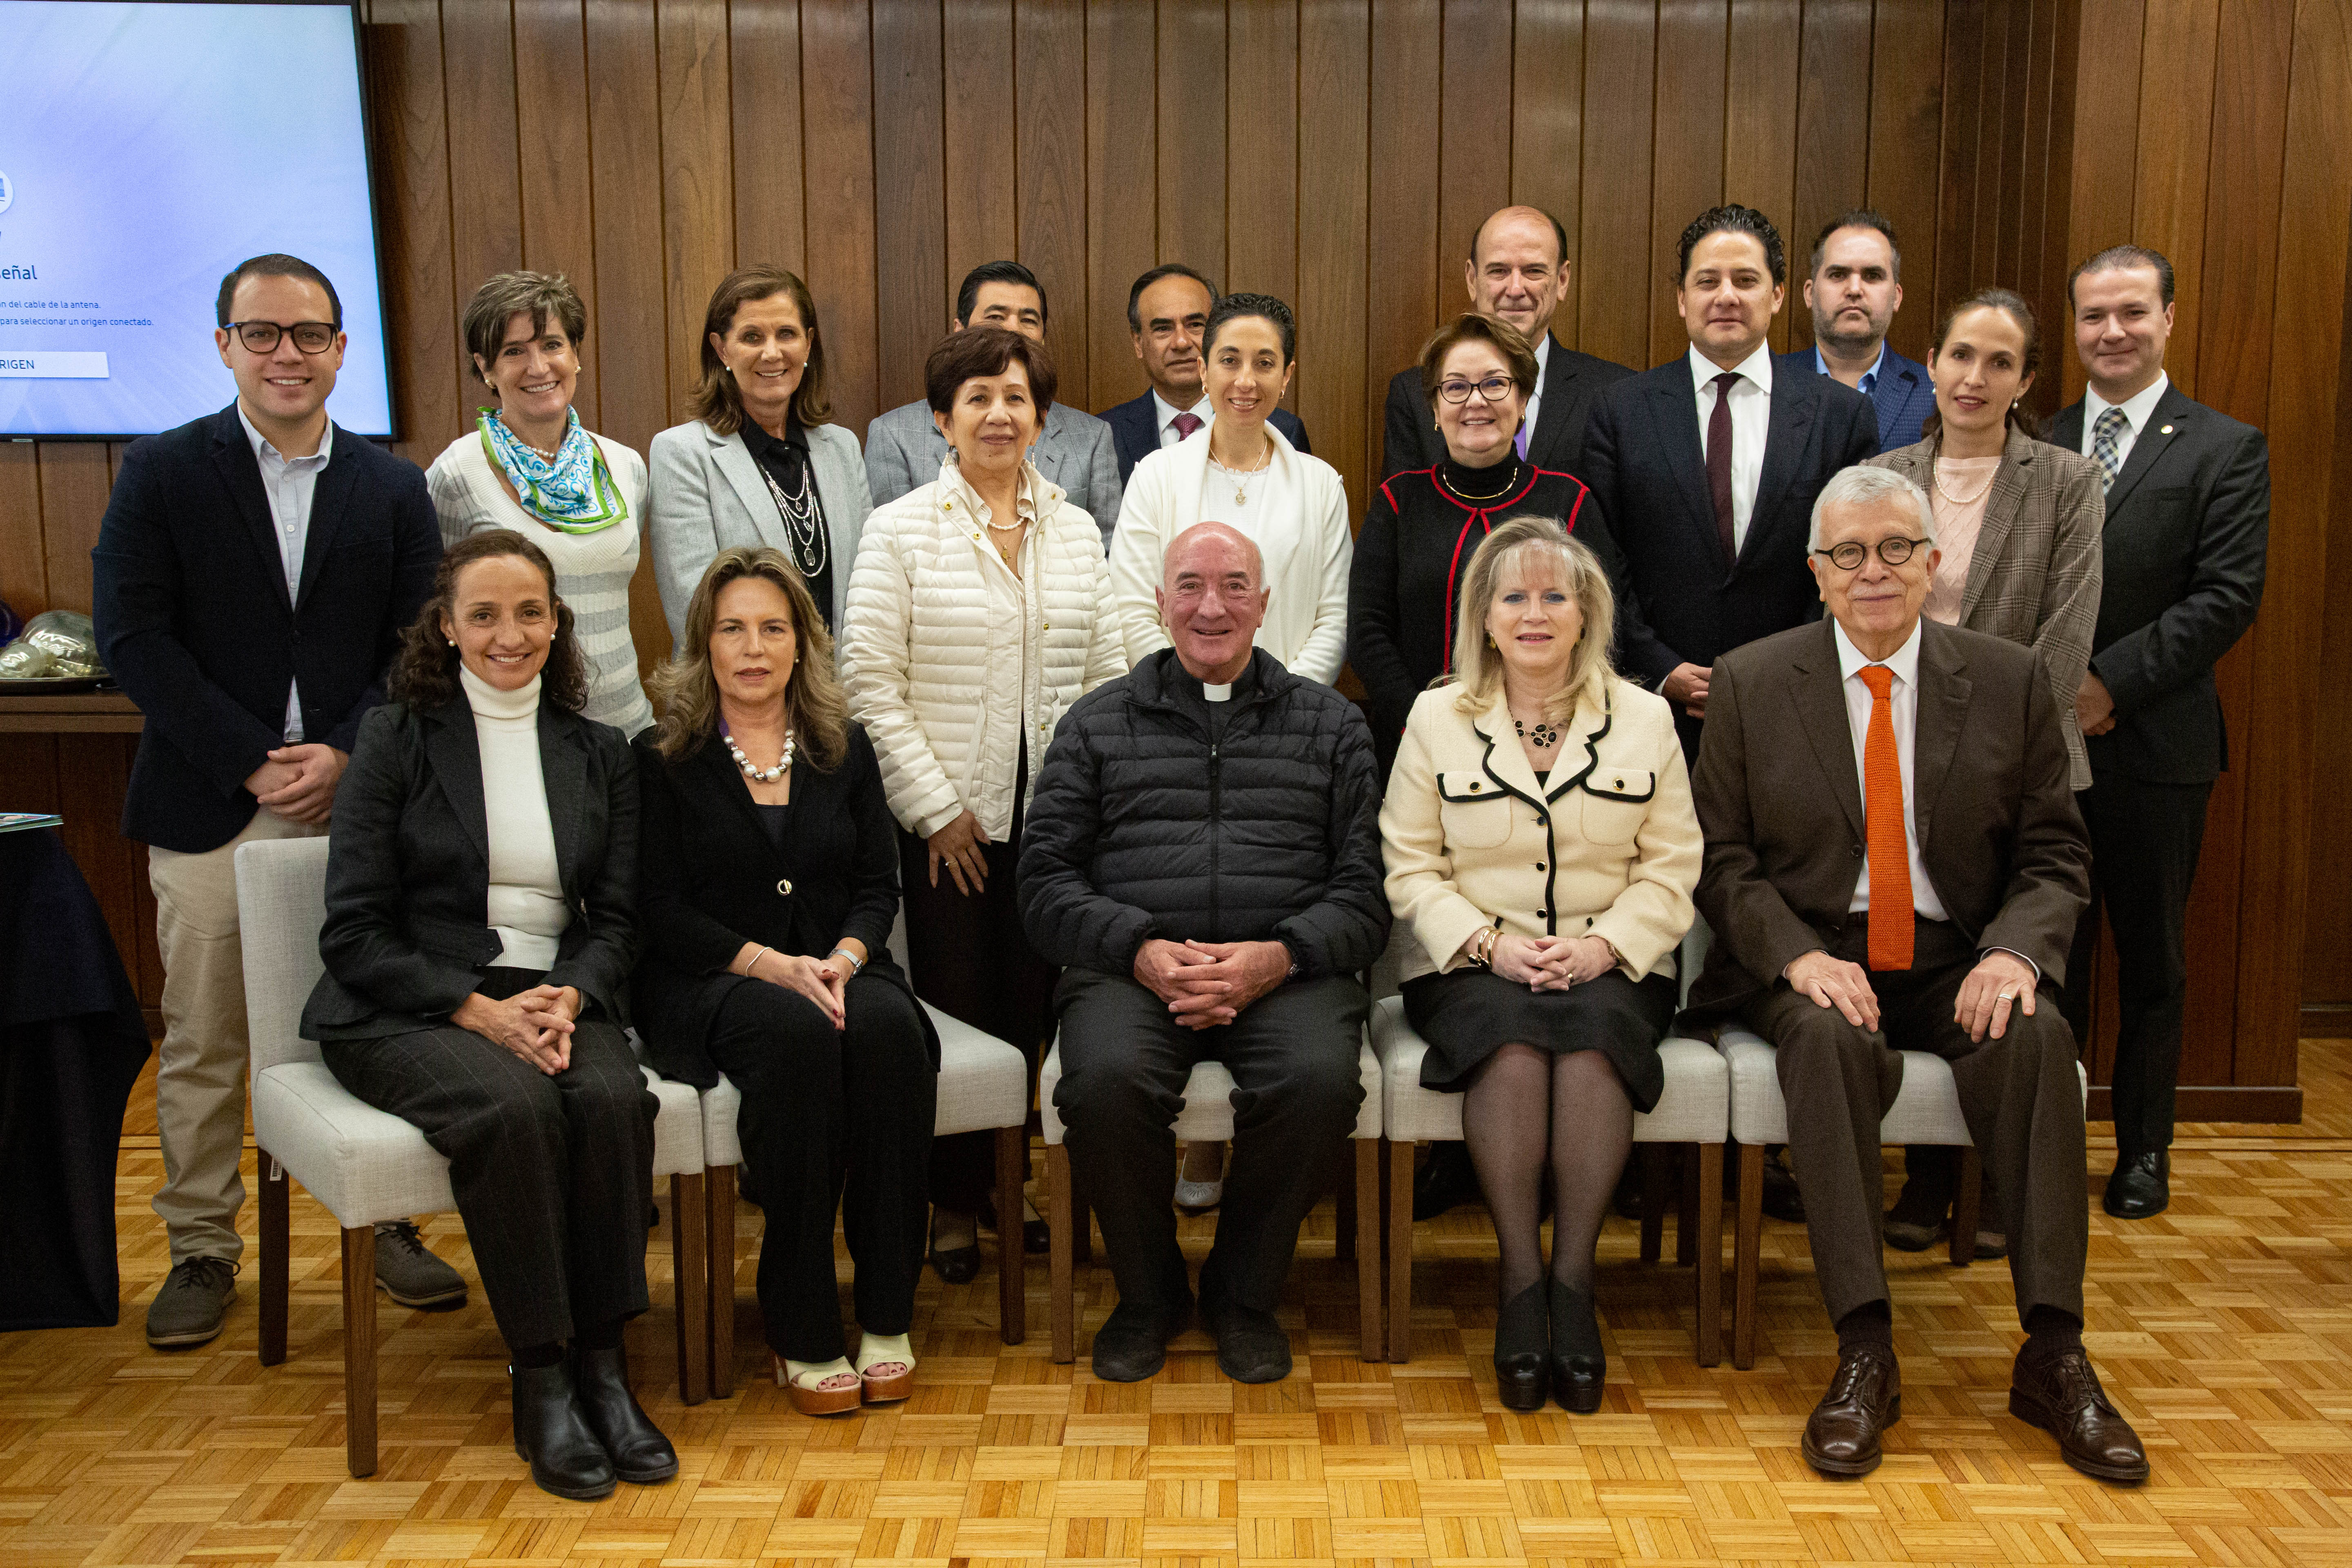 New members will be incorporating Universidad Anahuac's Advisory Council of the School of Bioethics